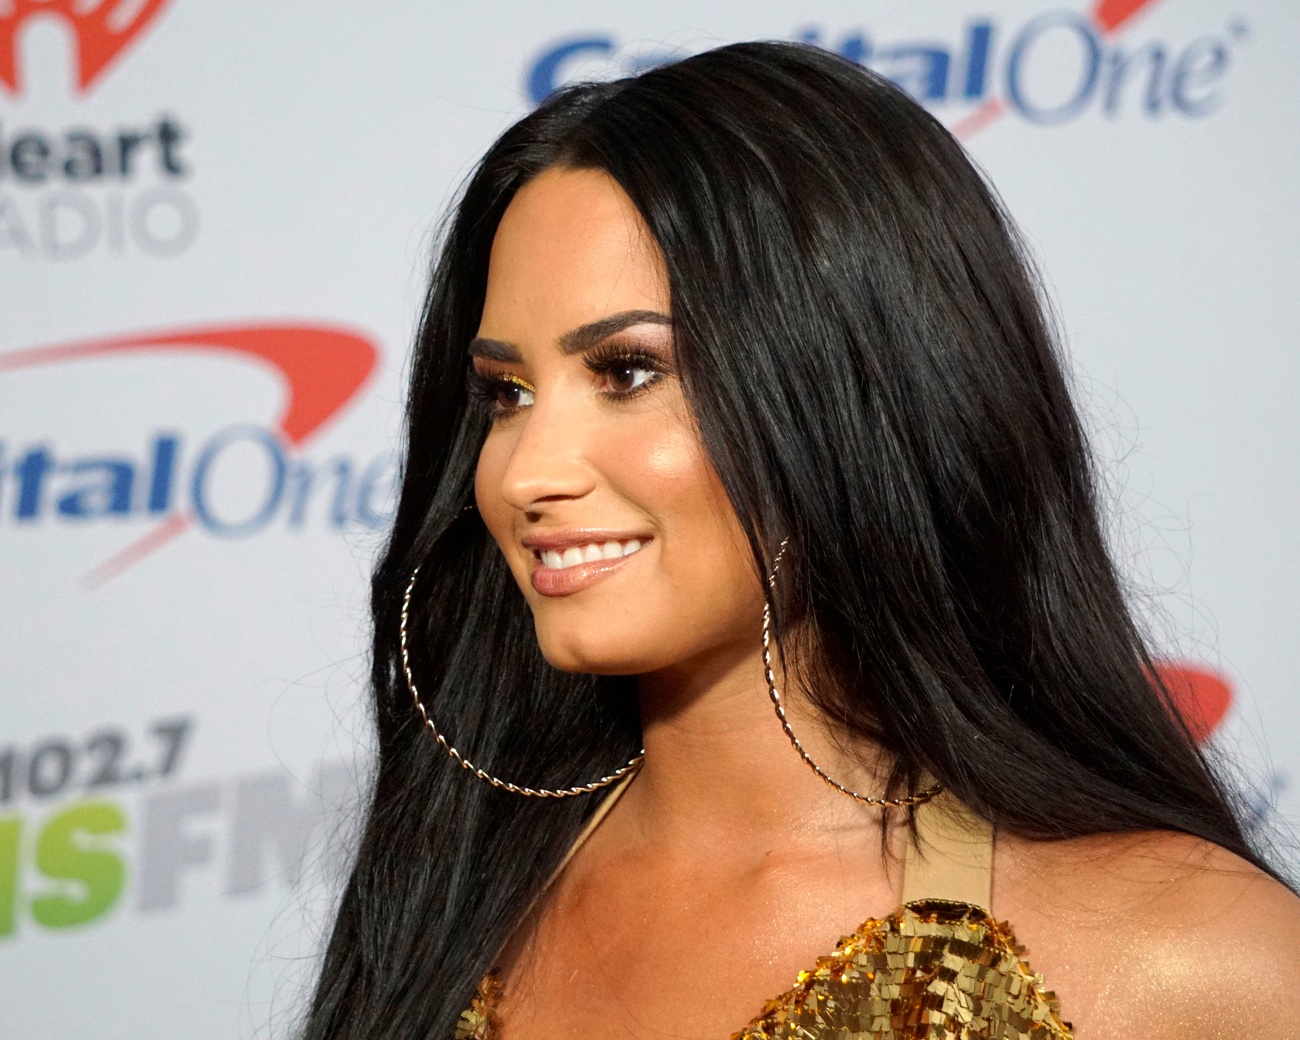 ‘You are all extraordinary’: Demi Lovato kicks off Pride Month with emotional message